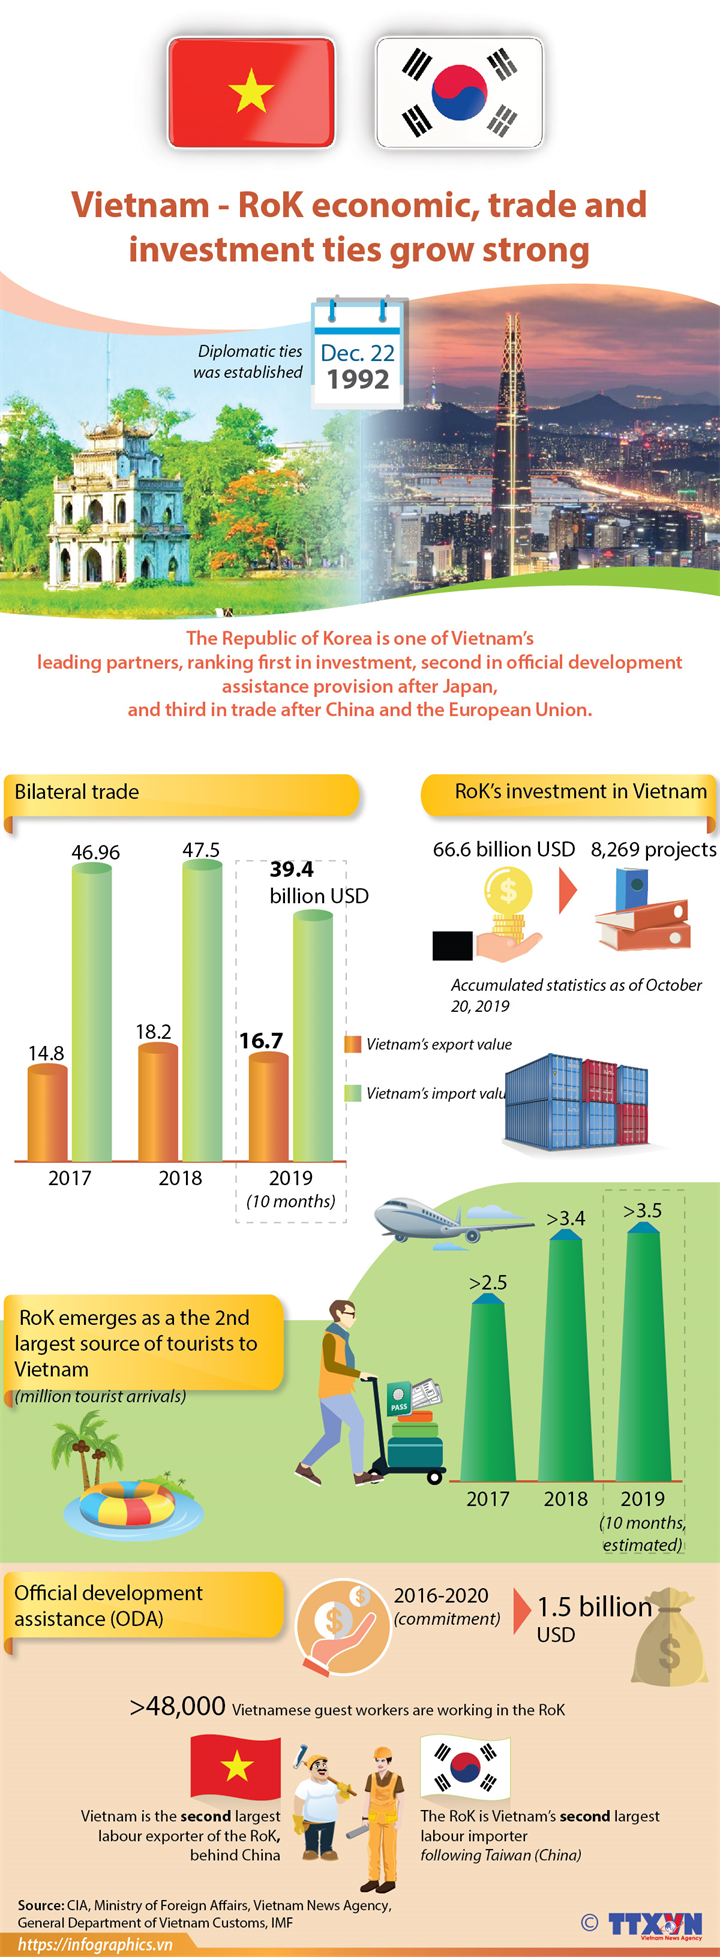 Vietnam - RoK economic, trade and investment ties grow strong